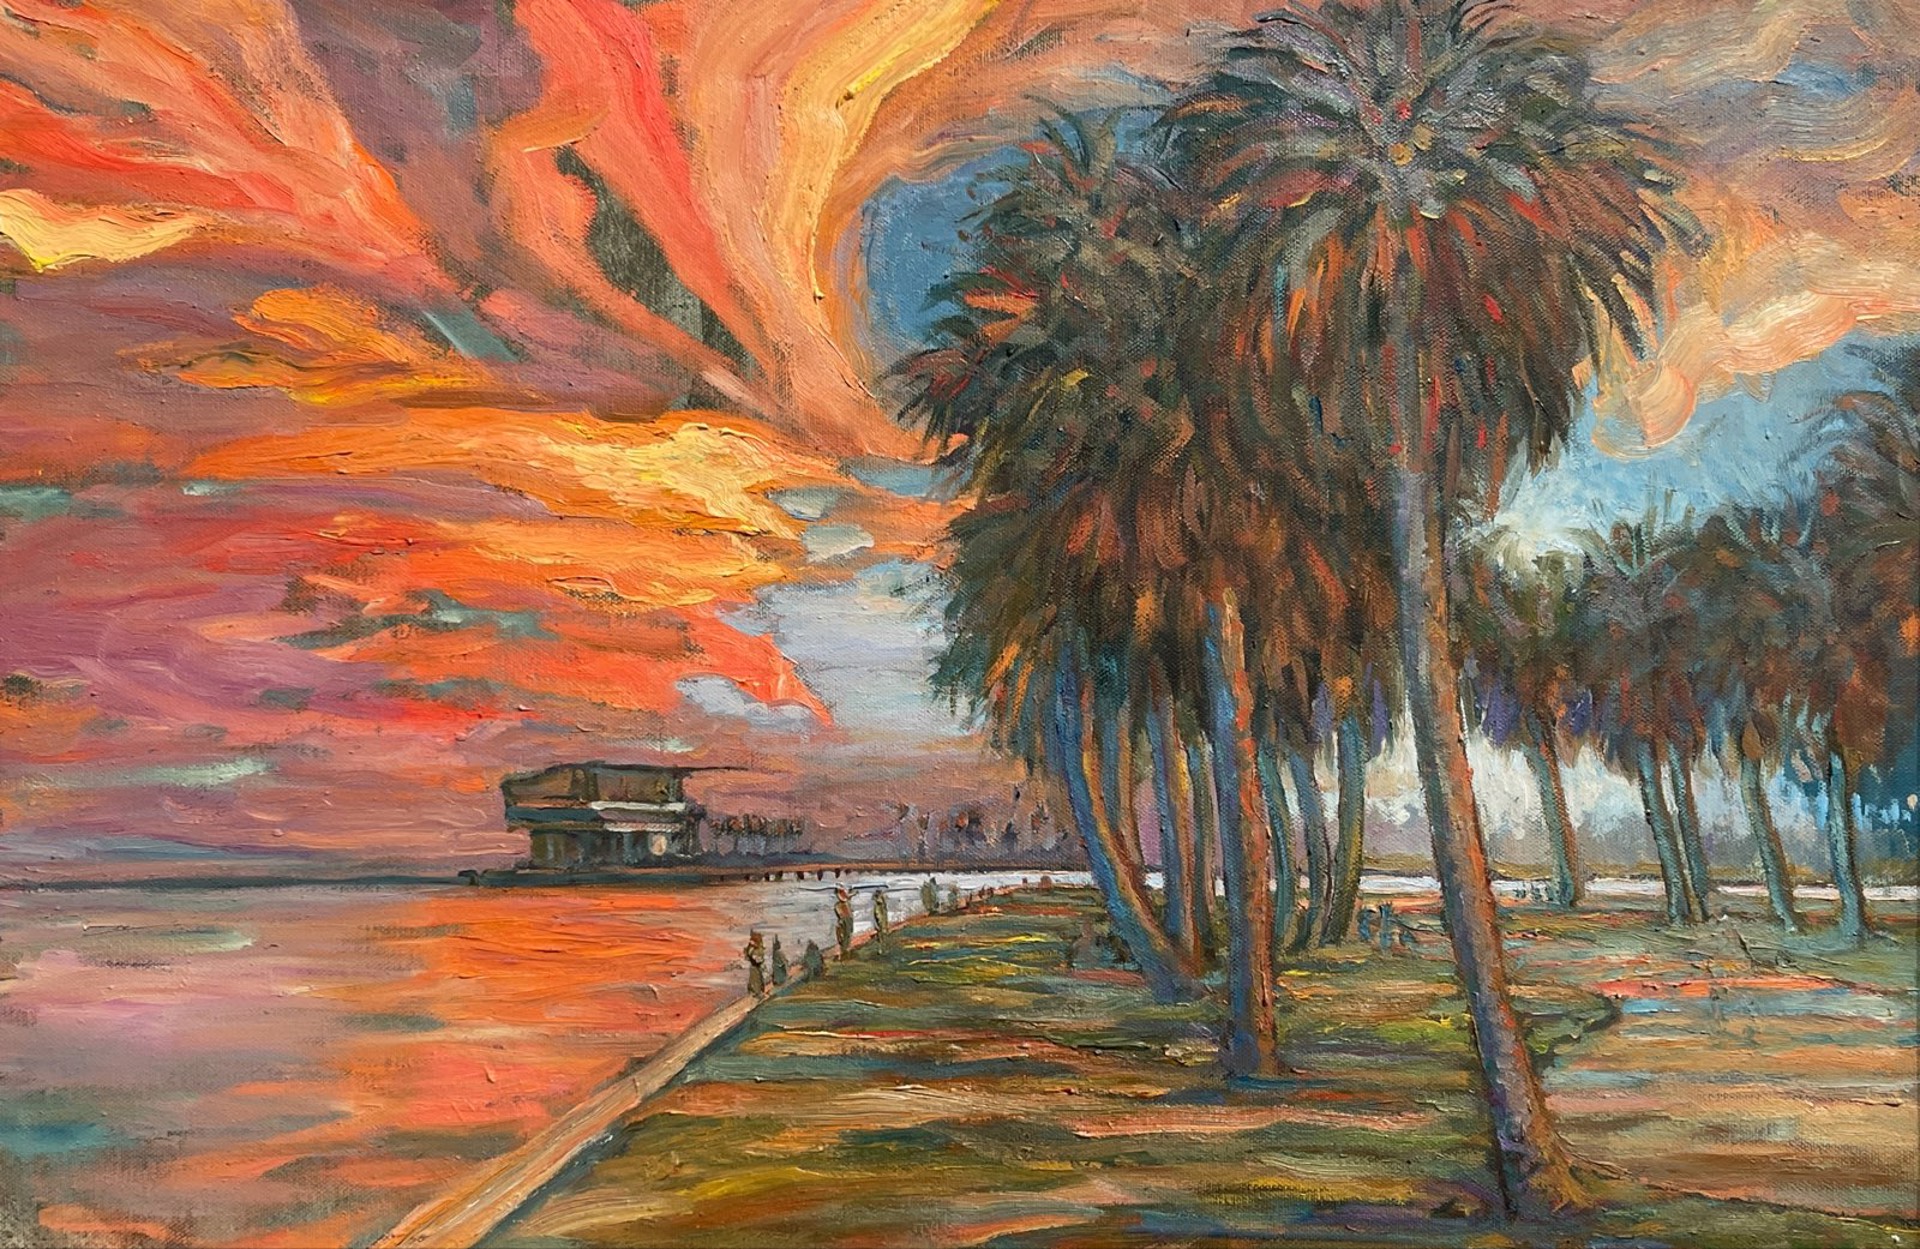 Sunset At The Pier by Carrie Jadus